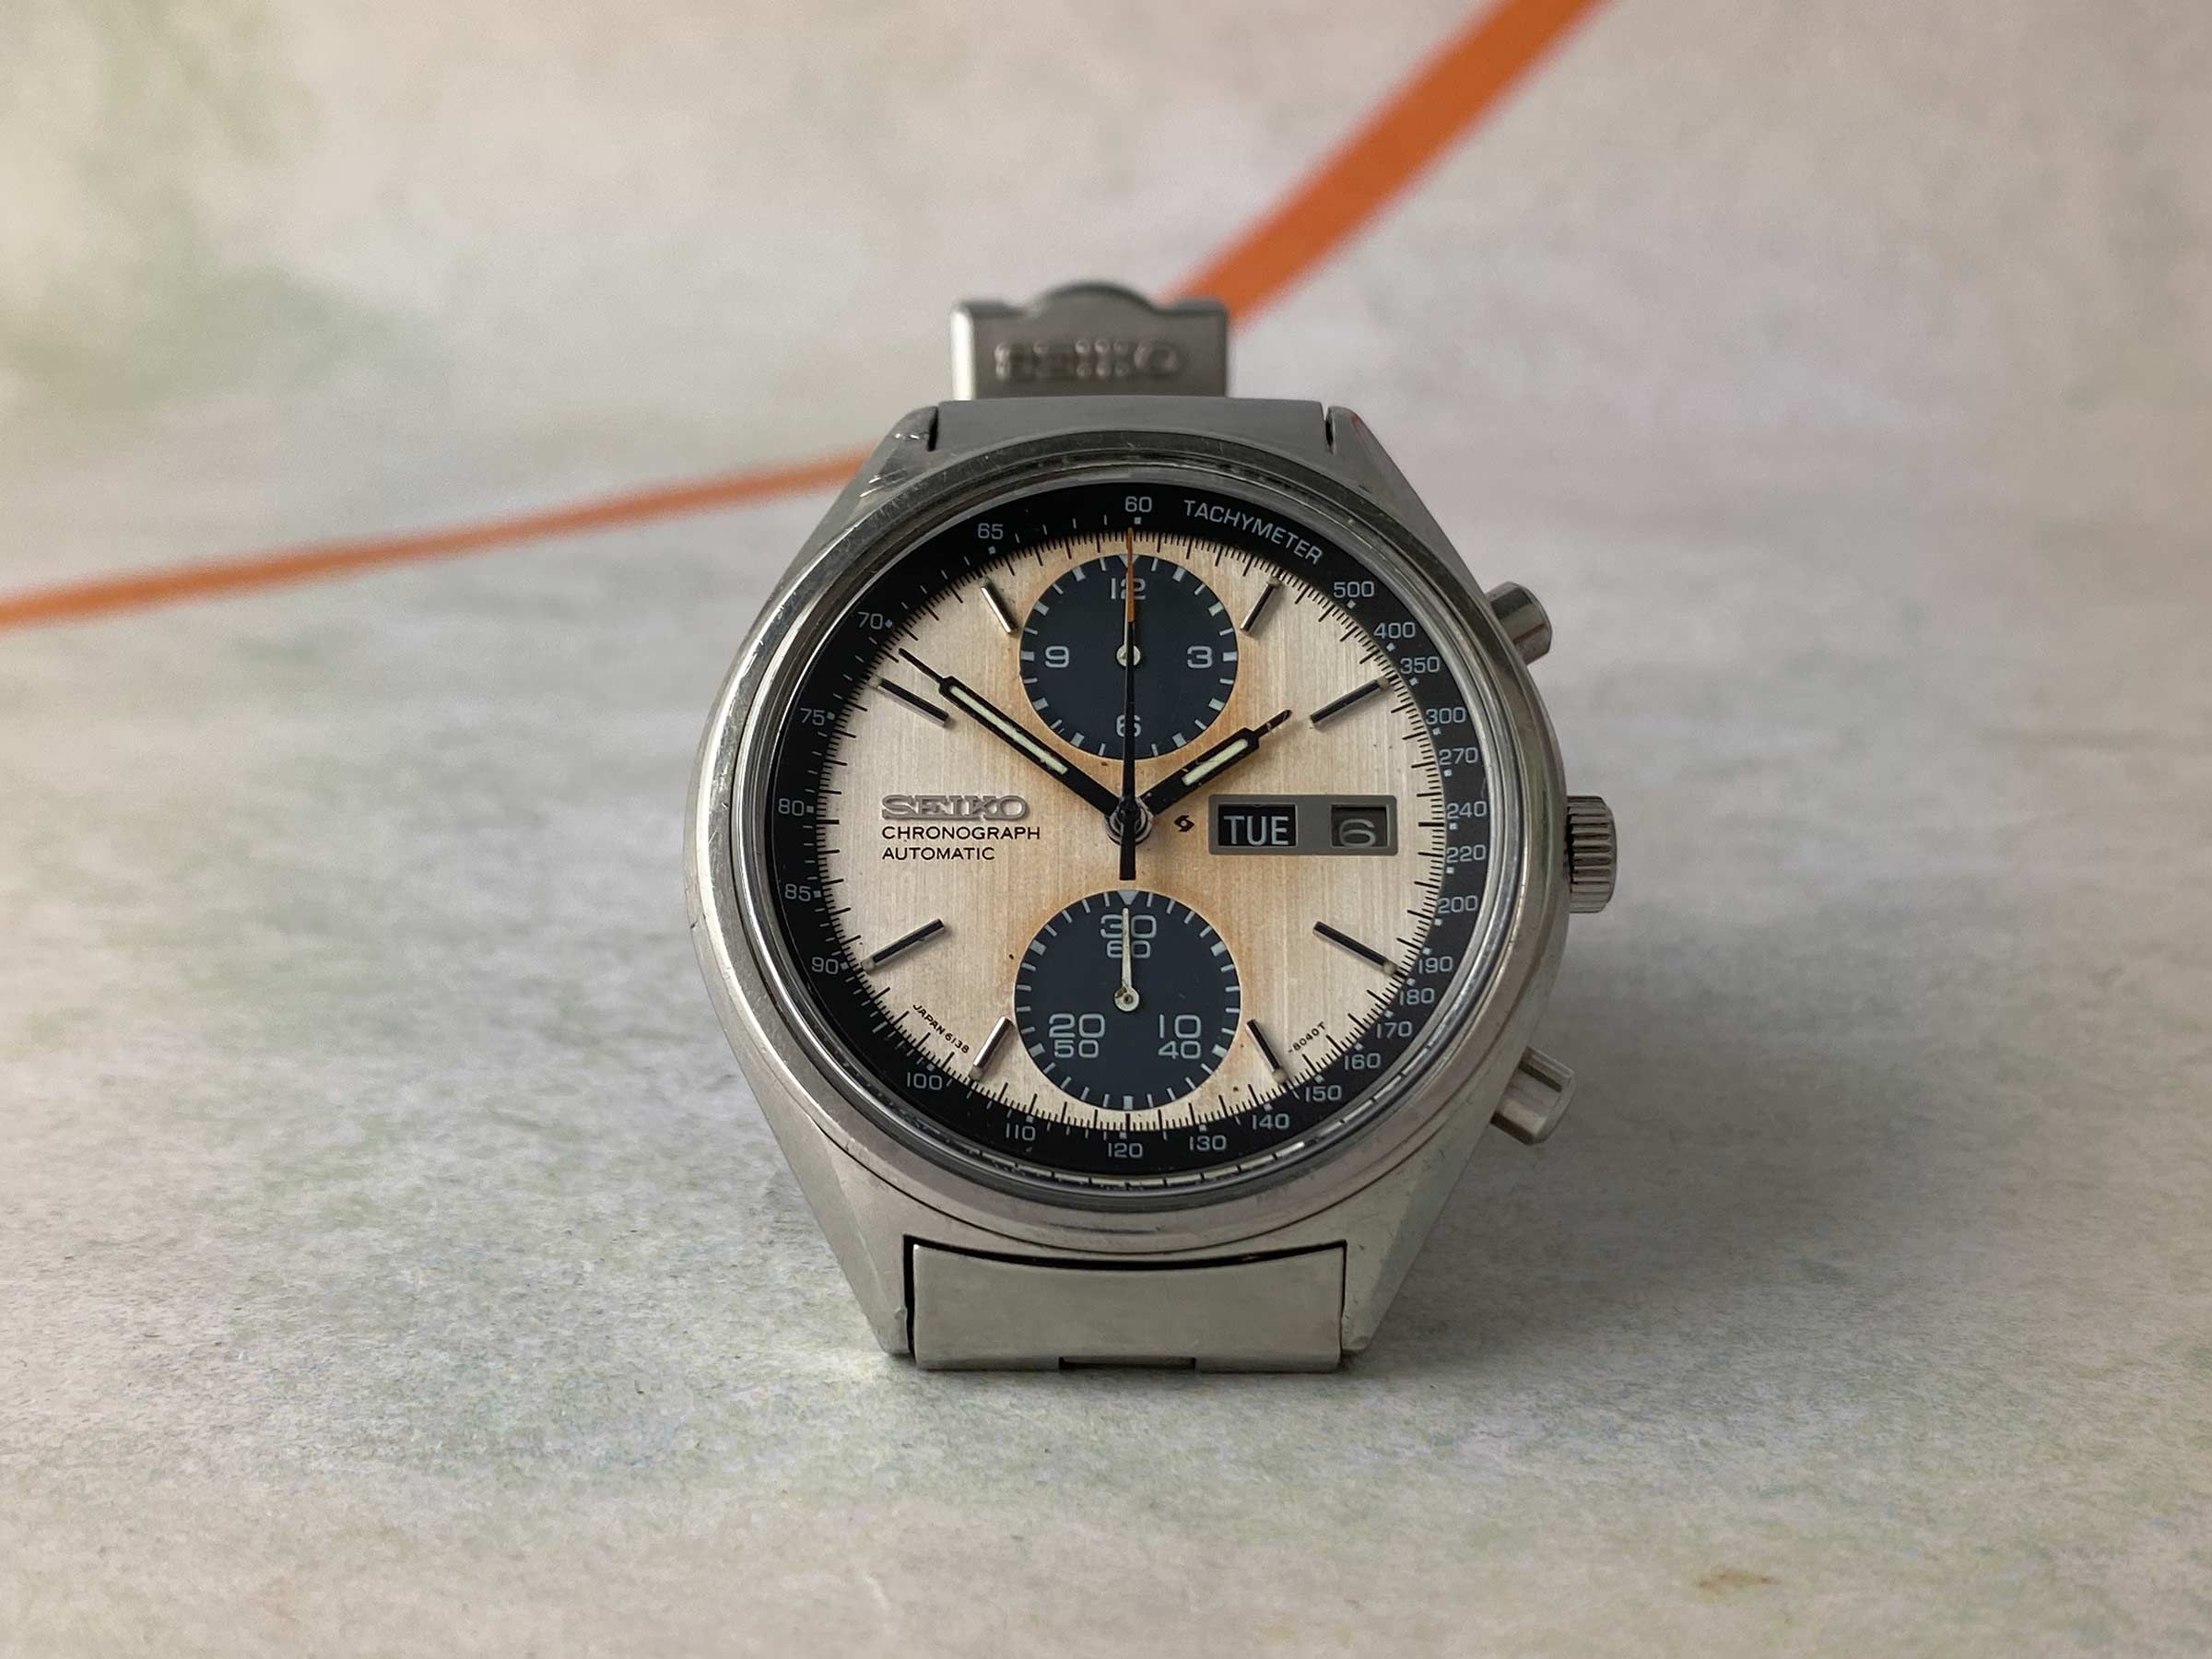 SEIKO PANDA Vintage automatic chronograph watch 1977 Ref. 6138-8020 Cal.  6138-B TROPICALIZED DIAL *** SPECTACULAR *** Seiko Vintage watches -  Watches83